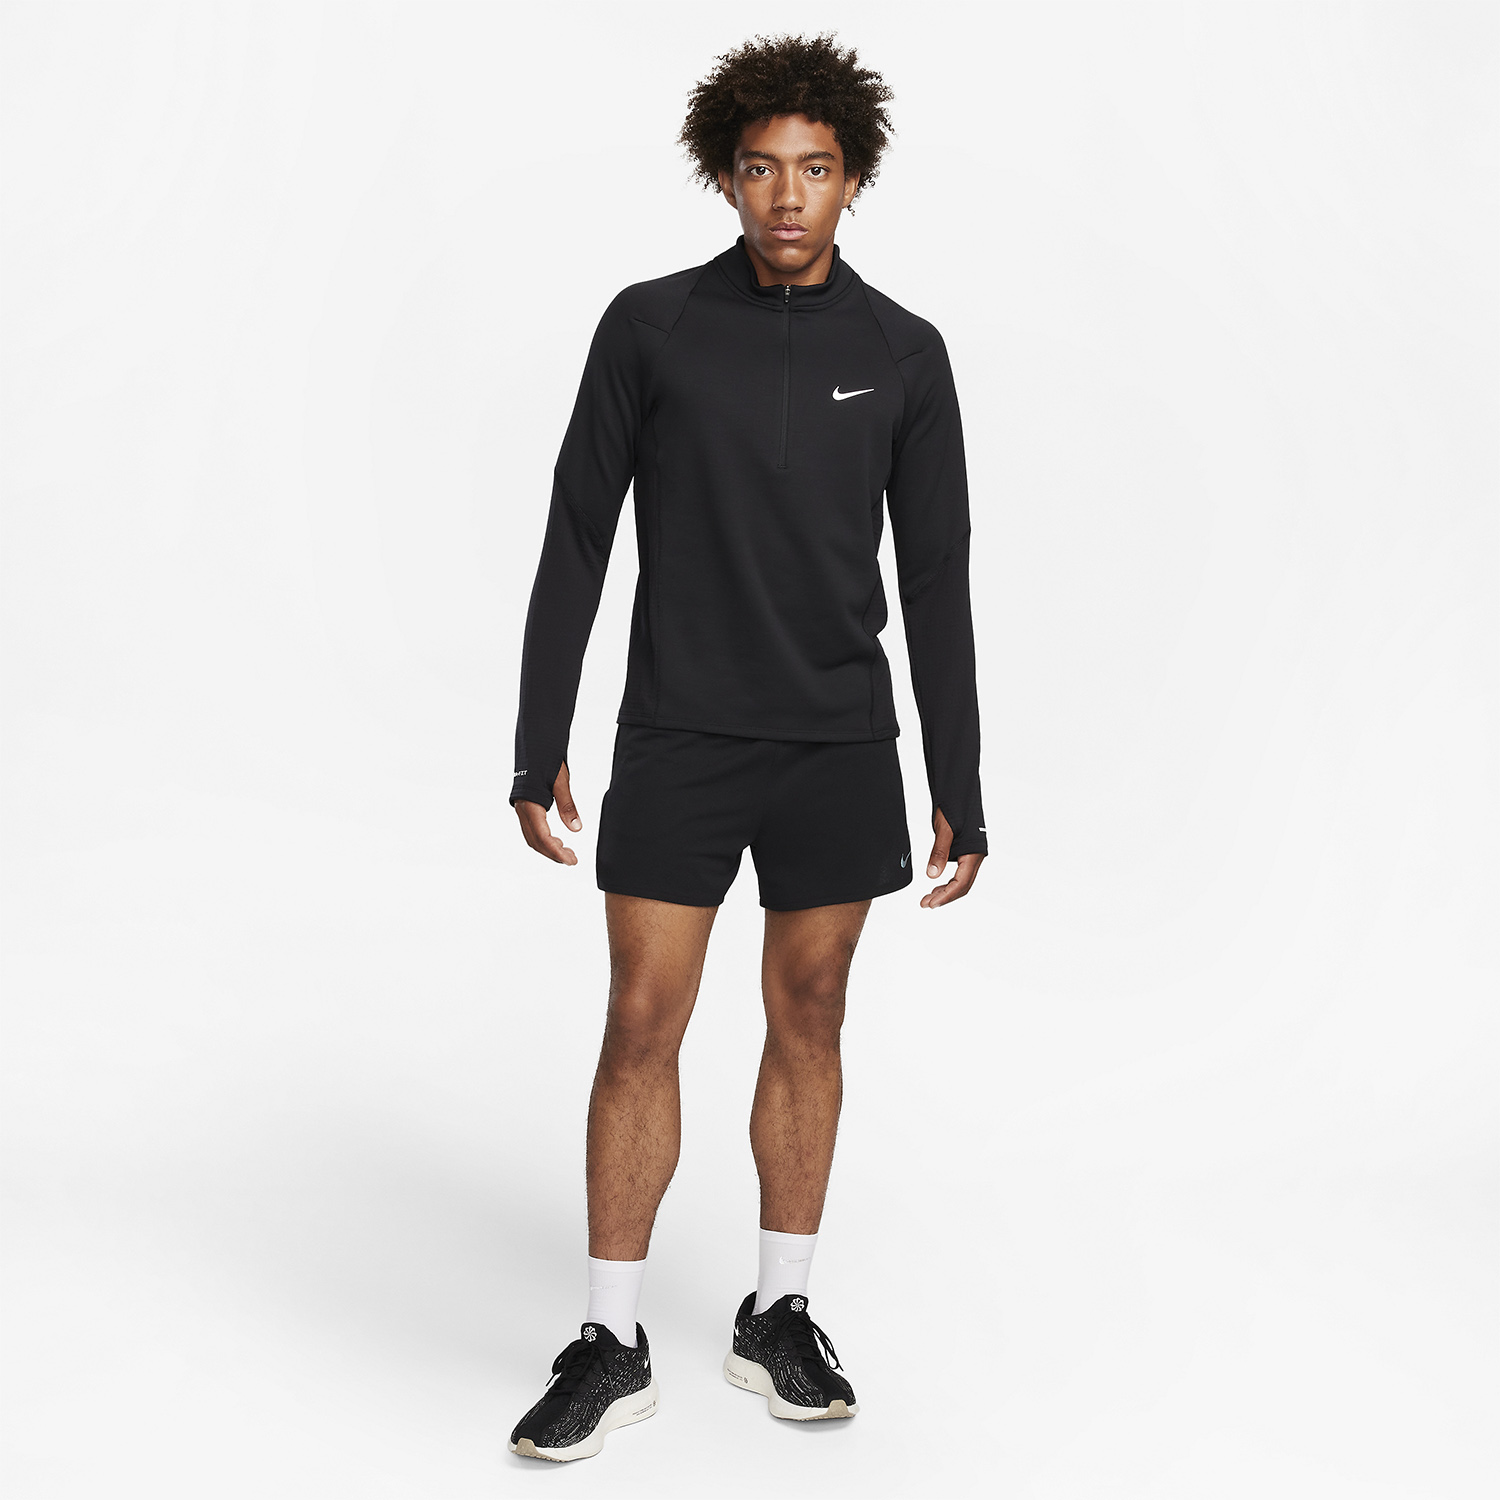 Nike Therma-FIT Element Camisa - Black/Reflective Silver